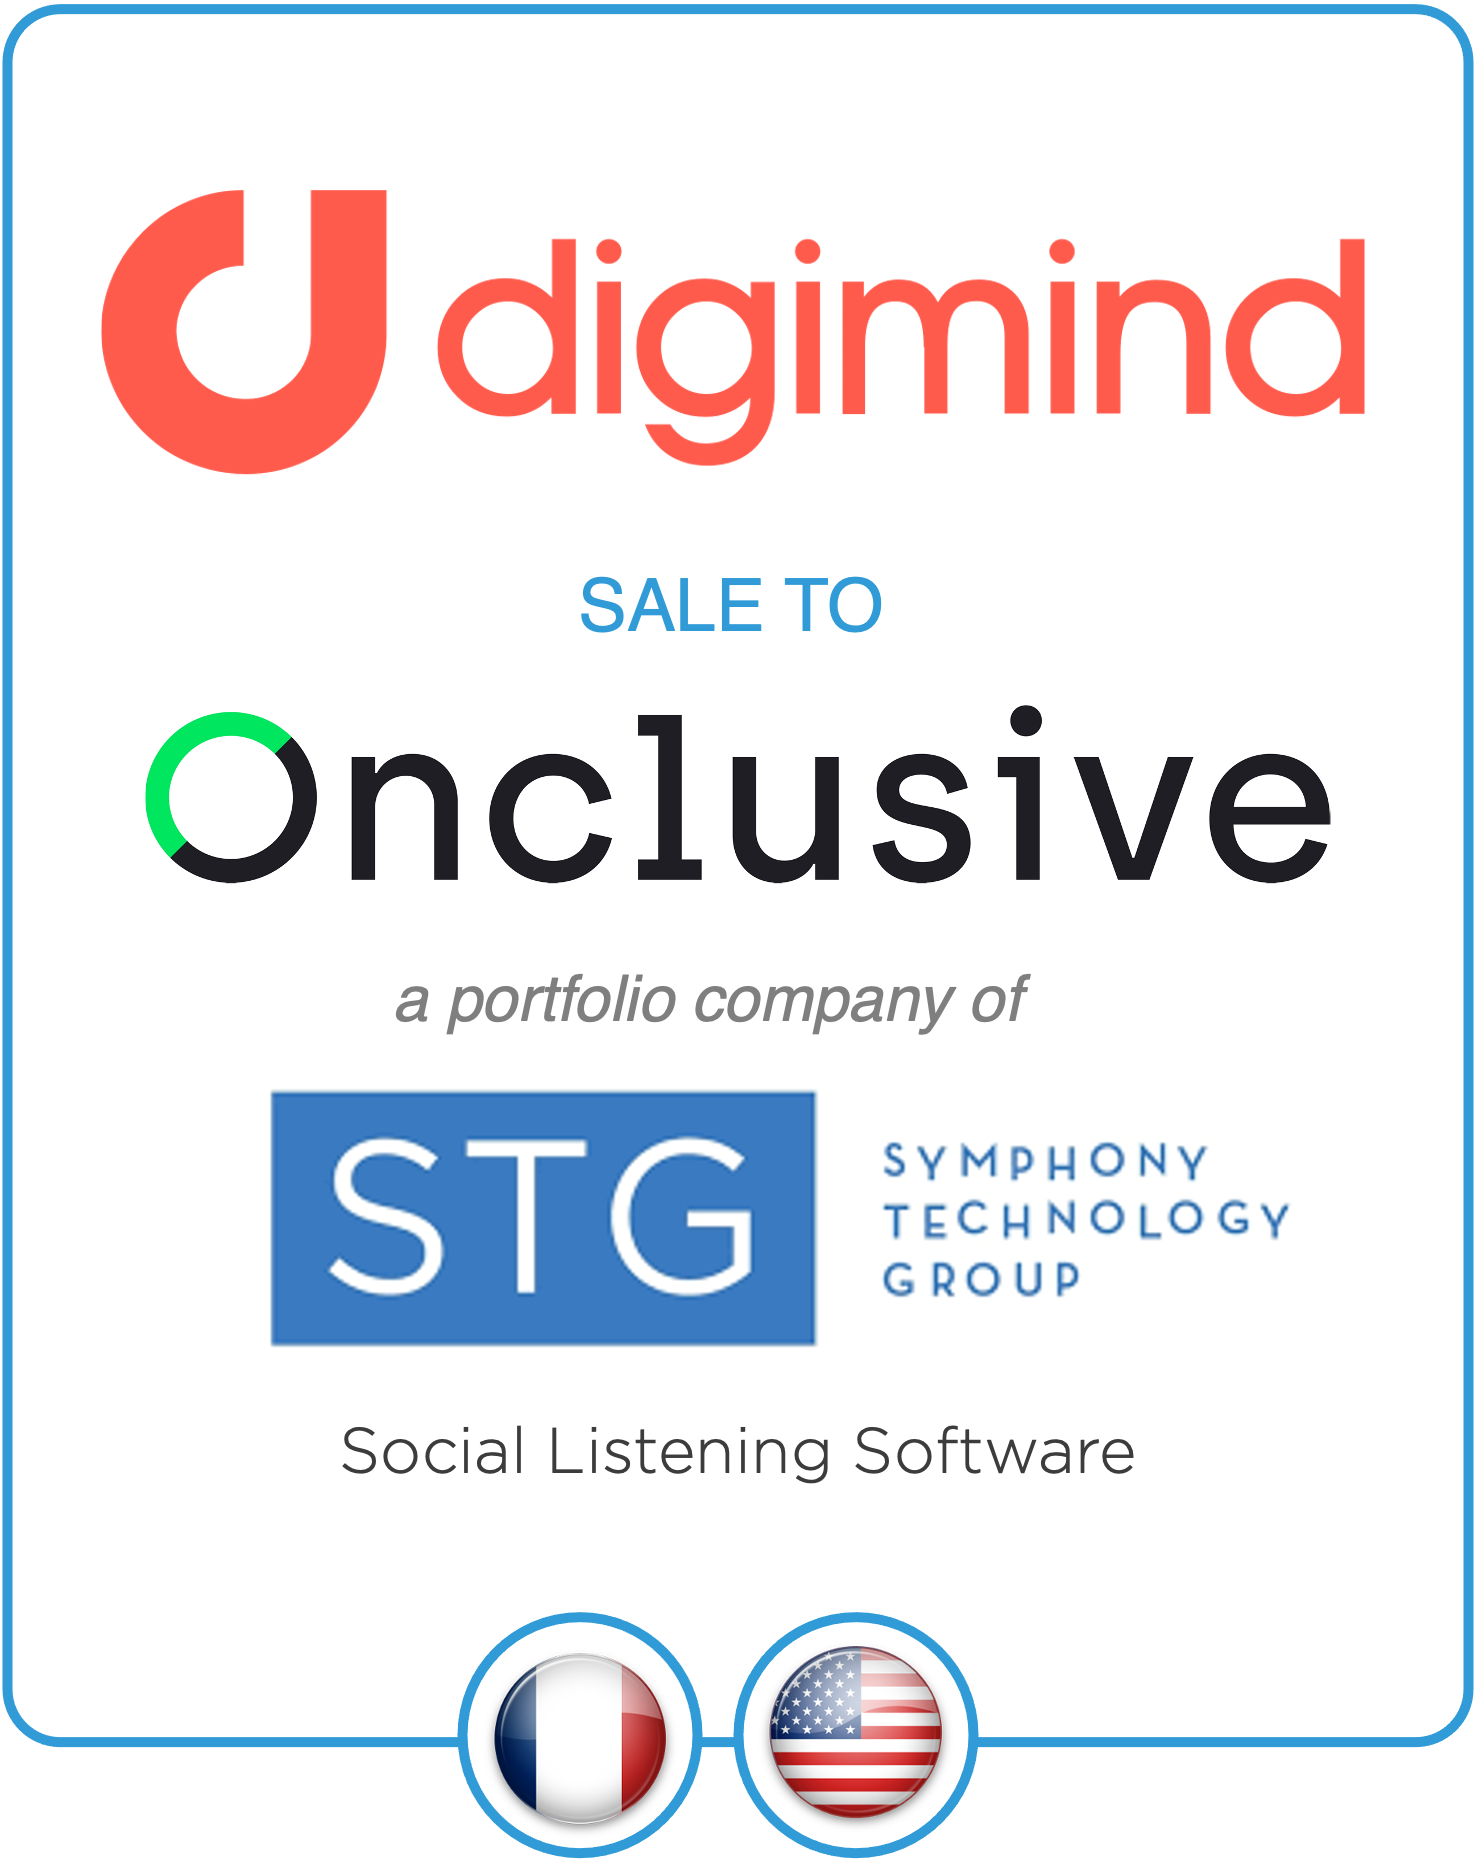 Drake Star Acts as Exclusive Financial Advisor to Digimind on its Sale to Onclusive